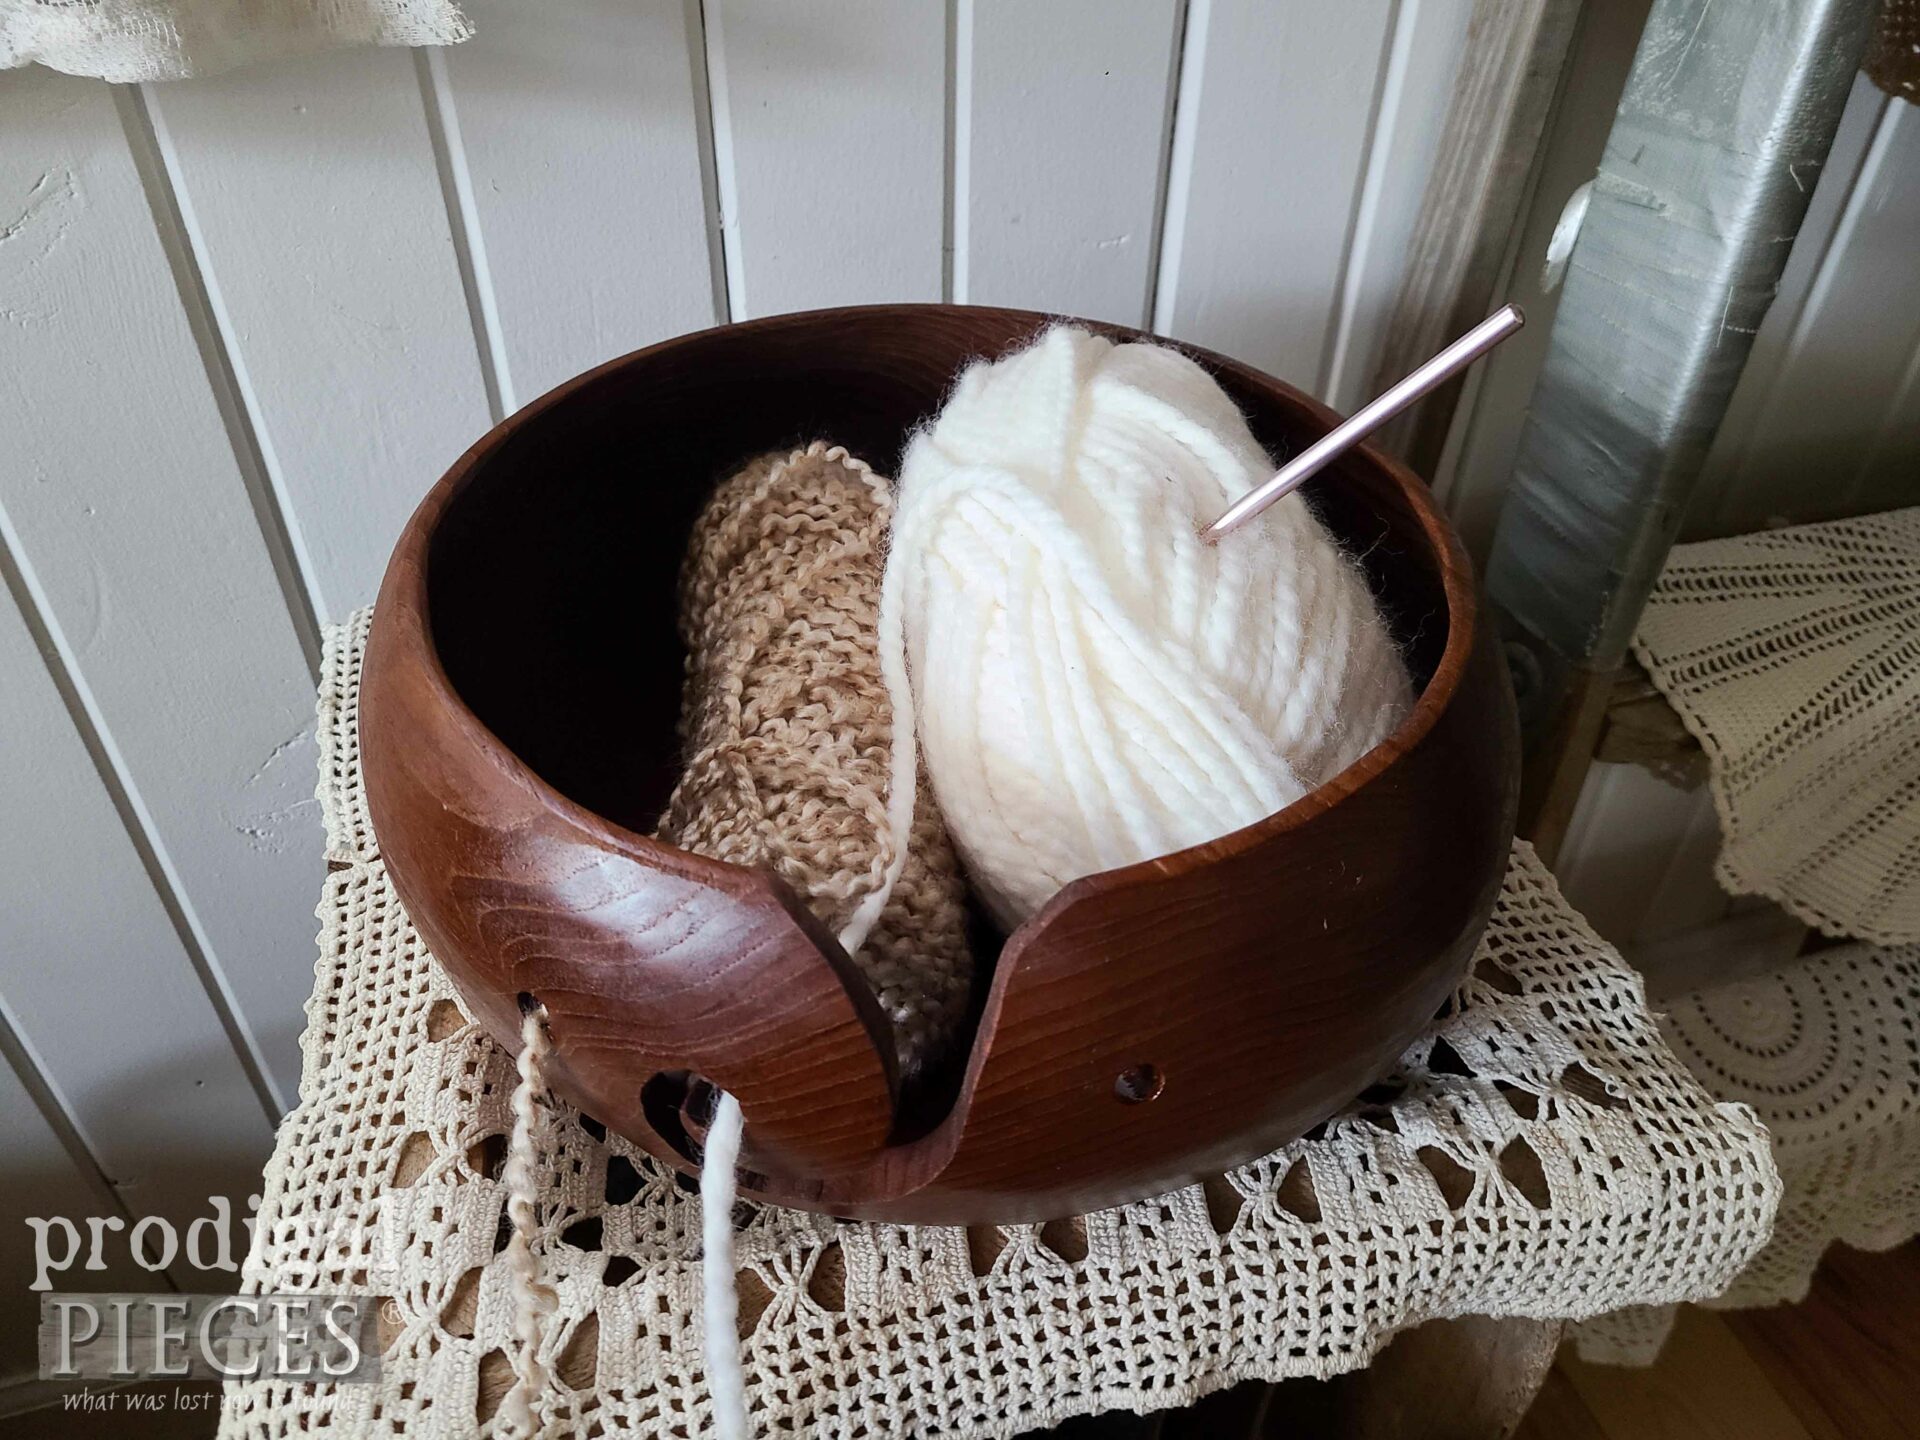 Yarn in Yarn Bowl Made from Upcycled Salad Bowls by Larissa of Prodigal Pieces | prodigalpieces.com #prodigalpieces #crafts #crochet #knit